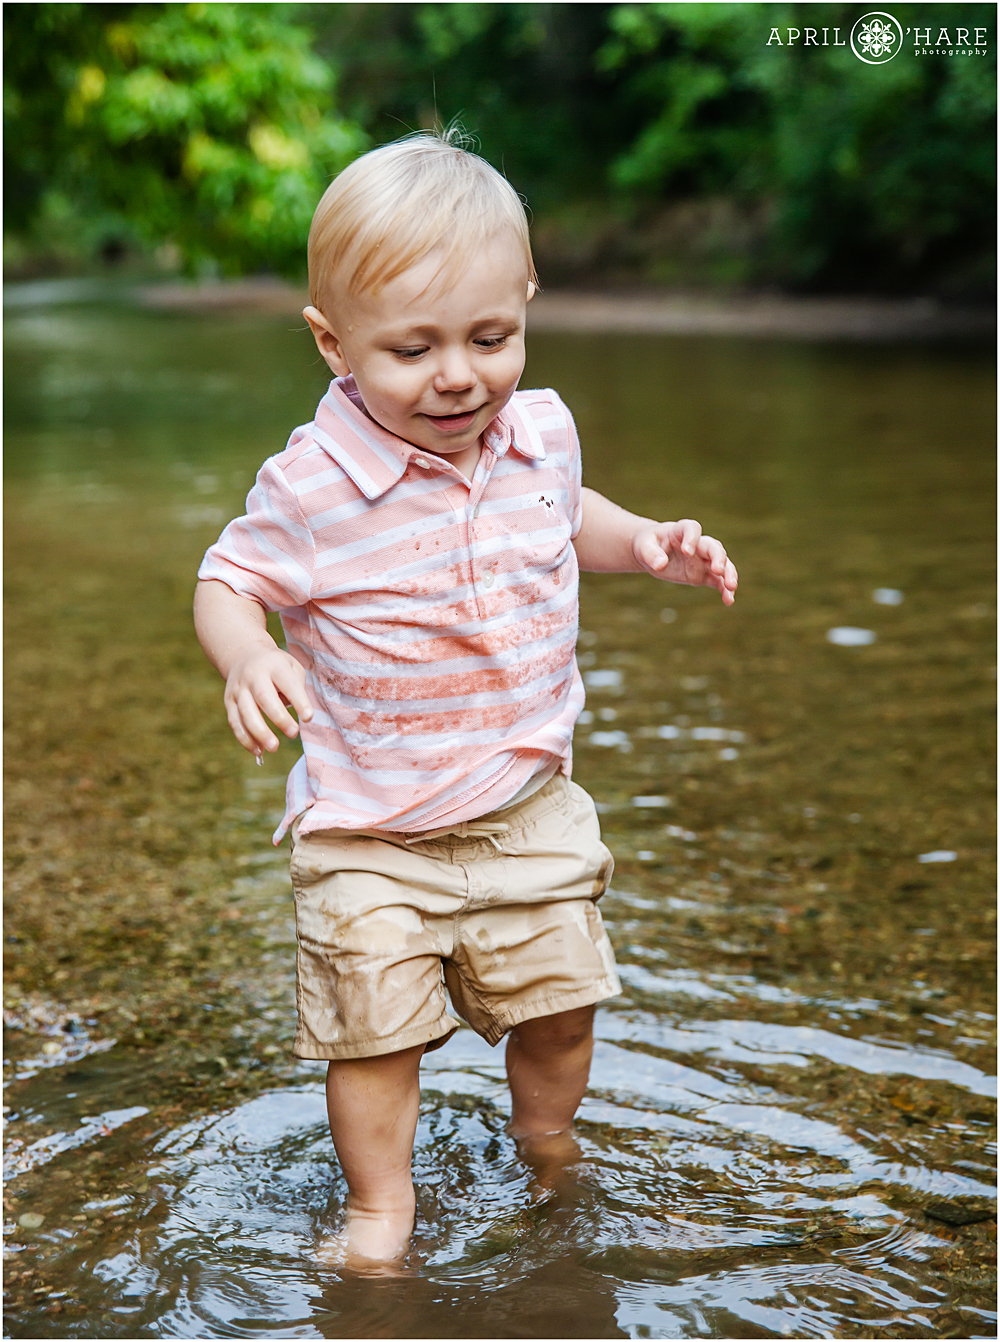 Sweet one year old baby boy plays in the shallow Cherry Creek near Four Mile Historic Park in Denver